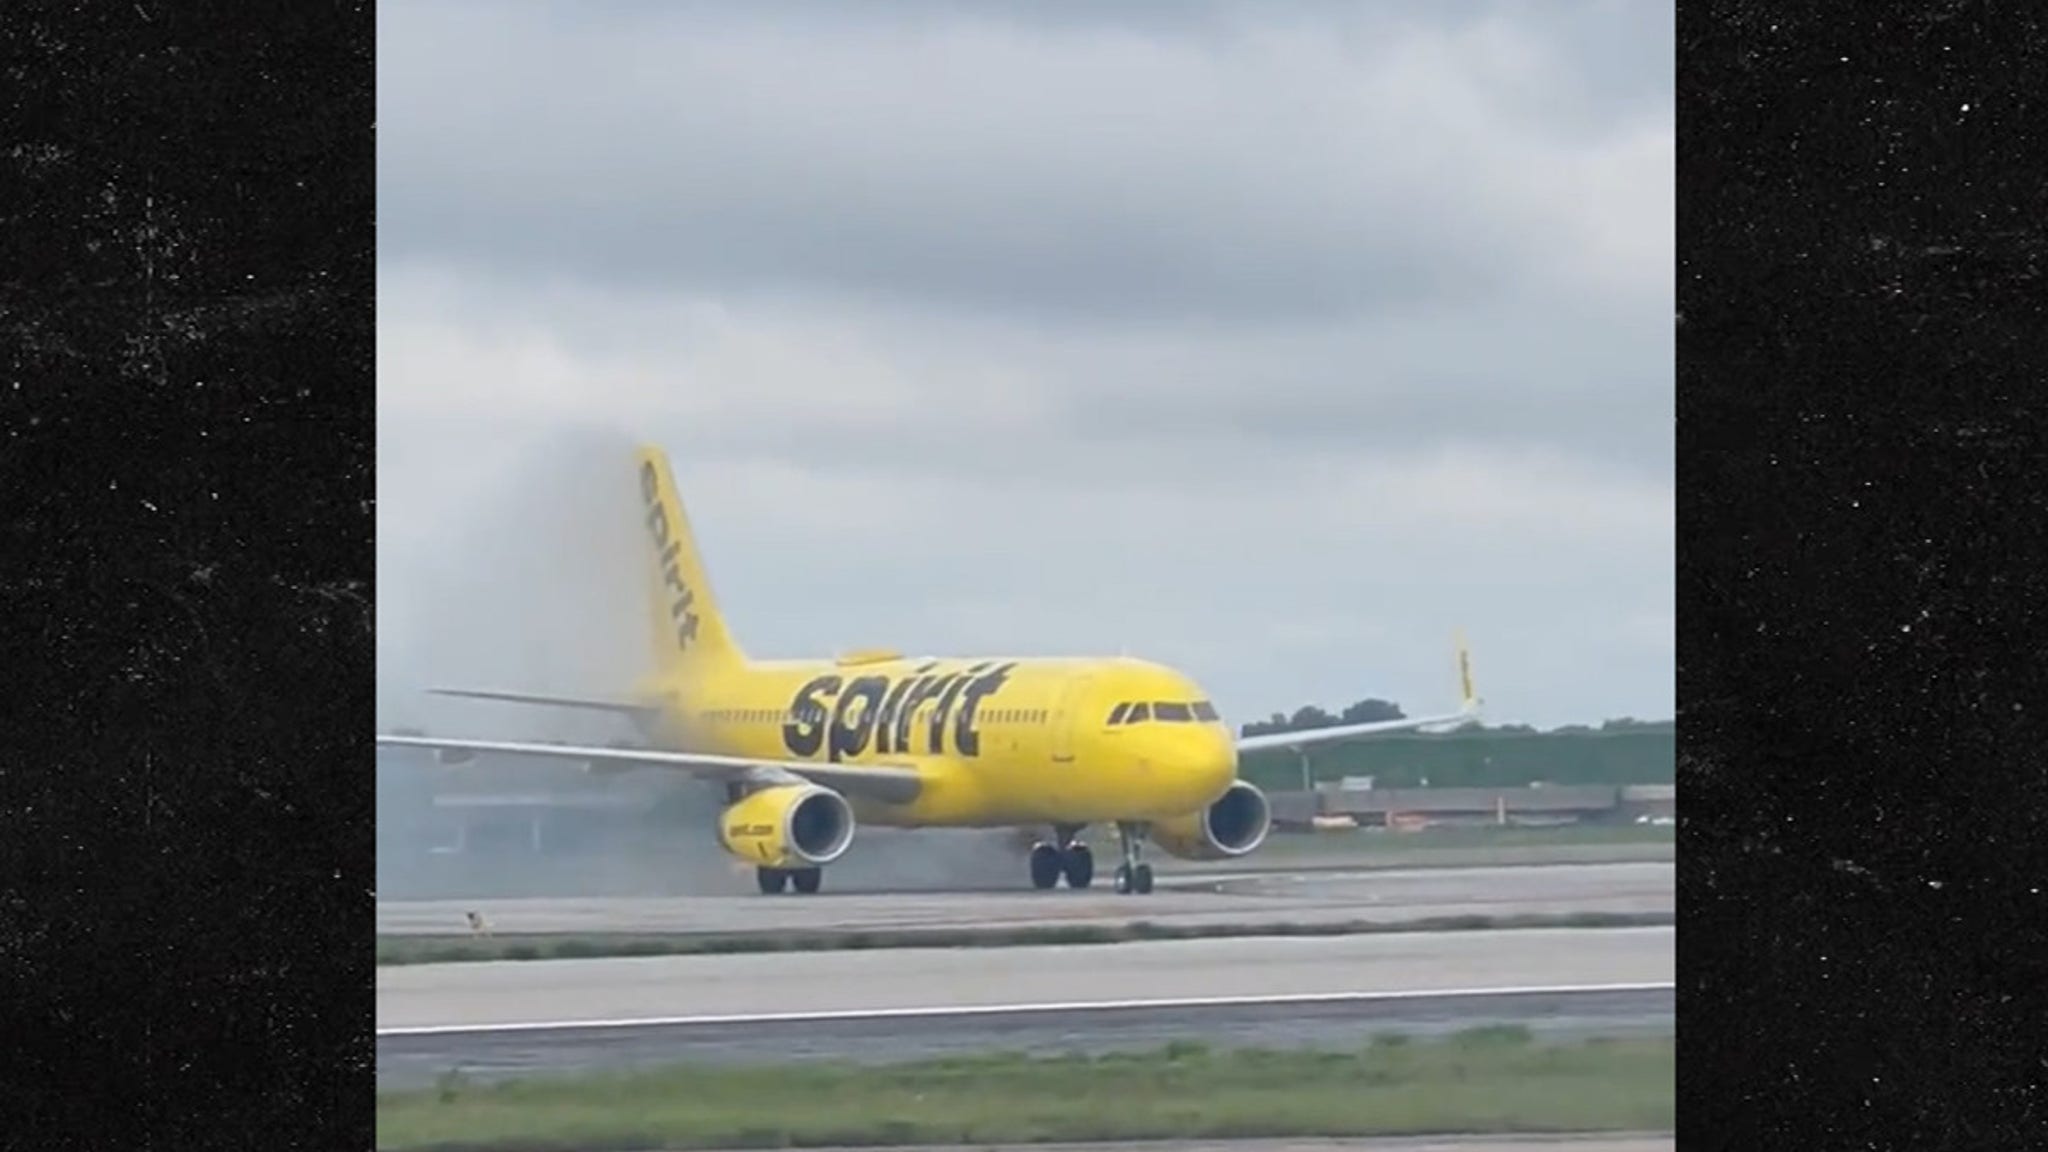 Spirit Airlines plane tire catches fire, passengers must 'stay seated'